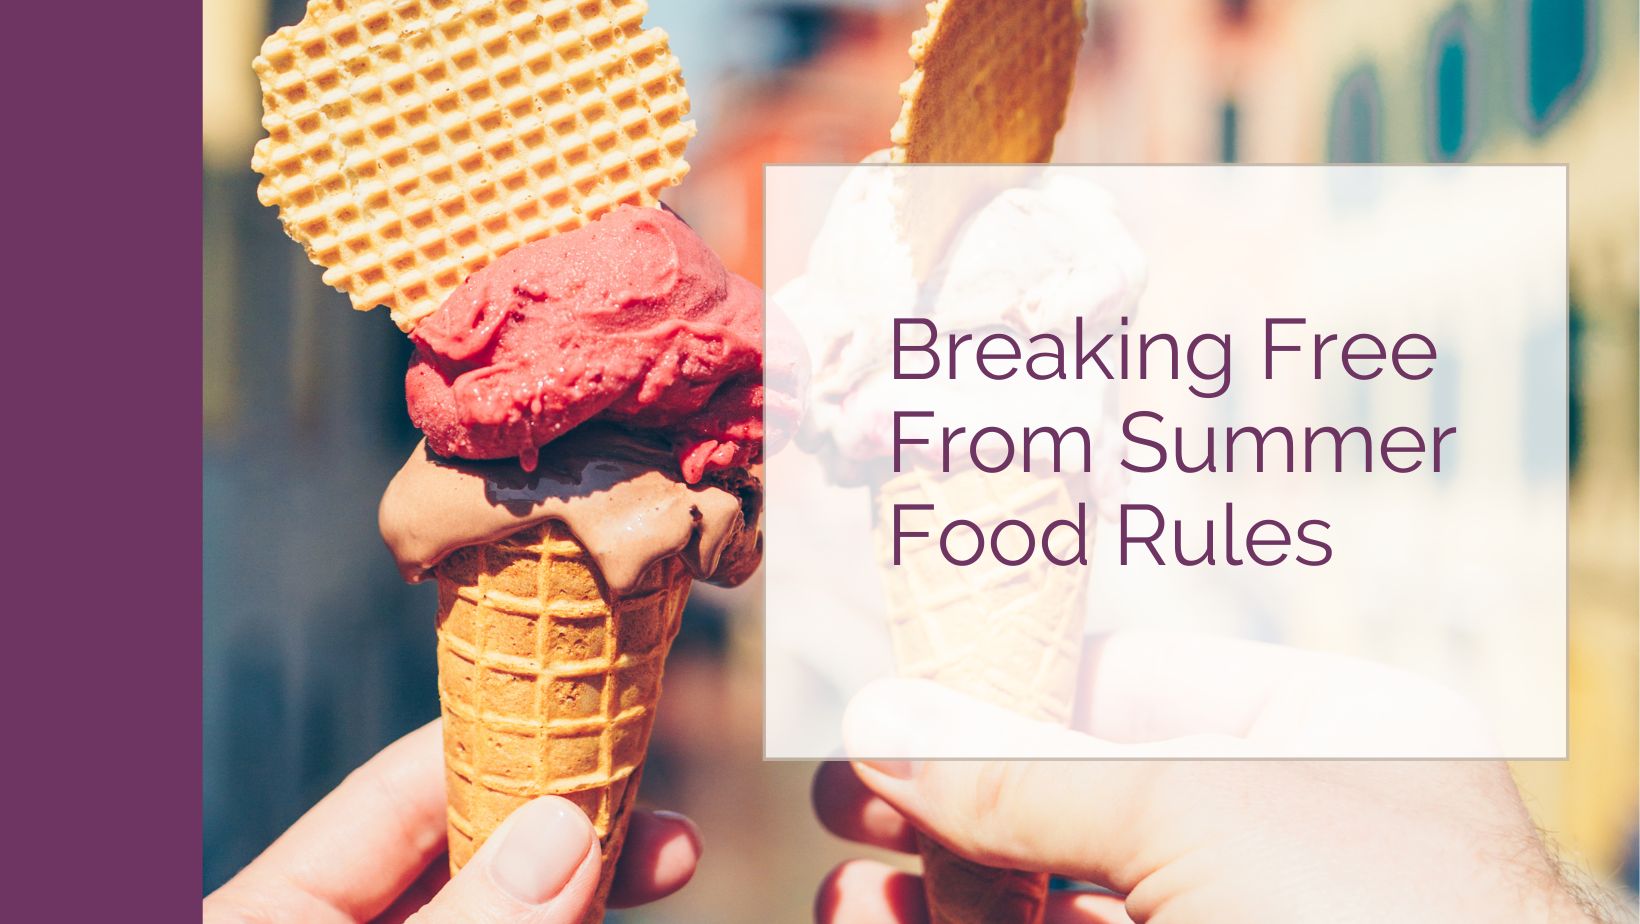 Breaking Free from Summer Food Rules